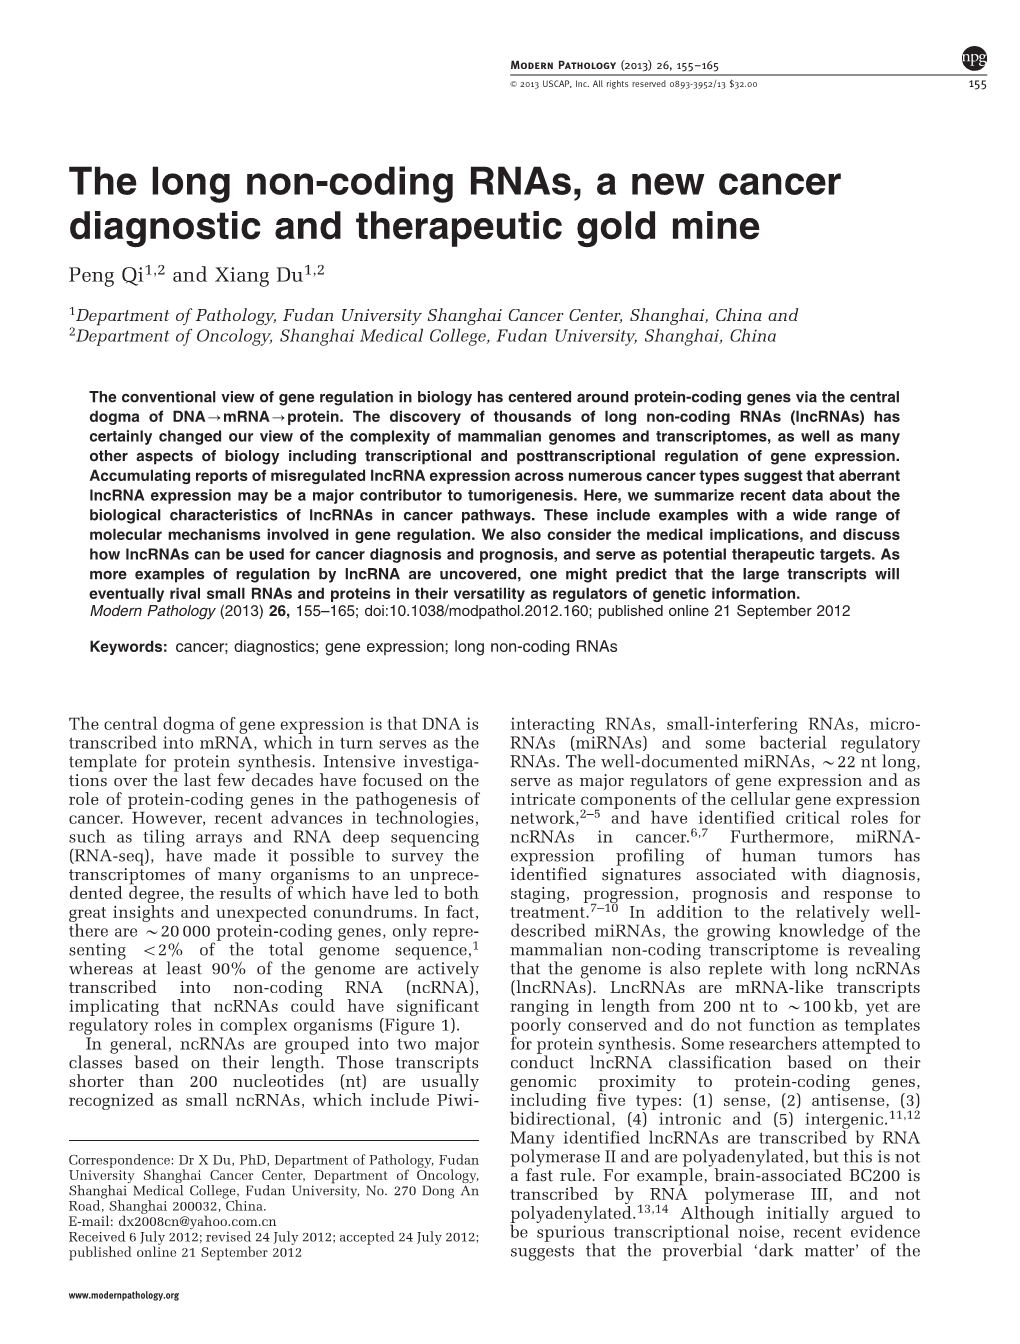 The Long Non-Coding Rnas, a New Cancer Diagnostic and Therapeutic Gold Mine Peng Qi1,2 and Xiang Du1,2